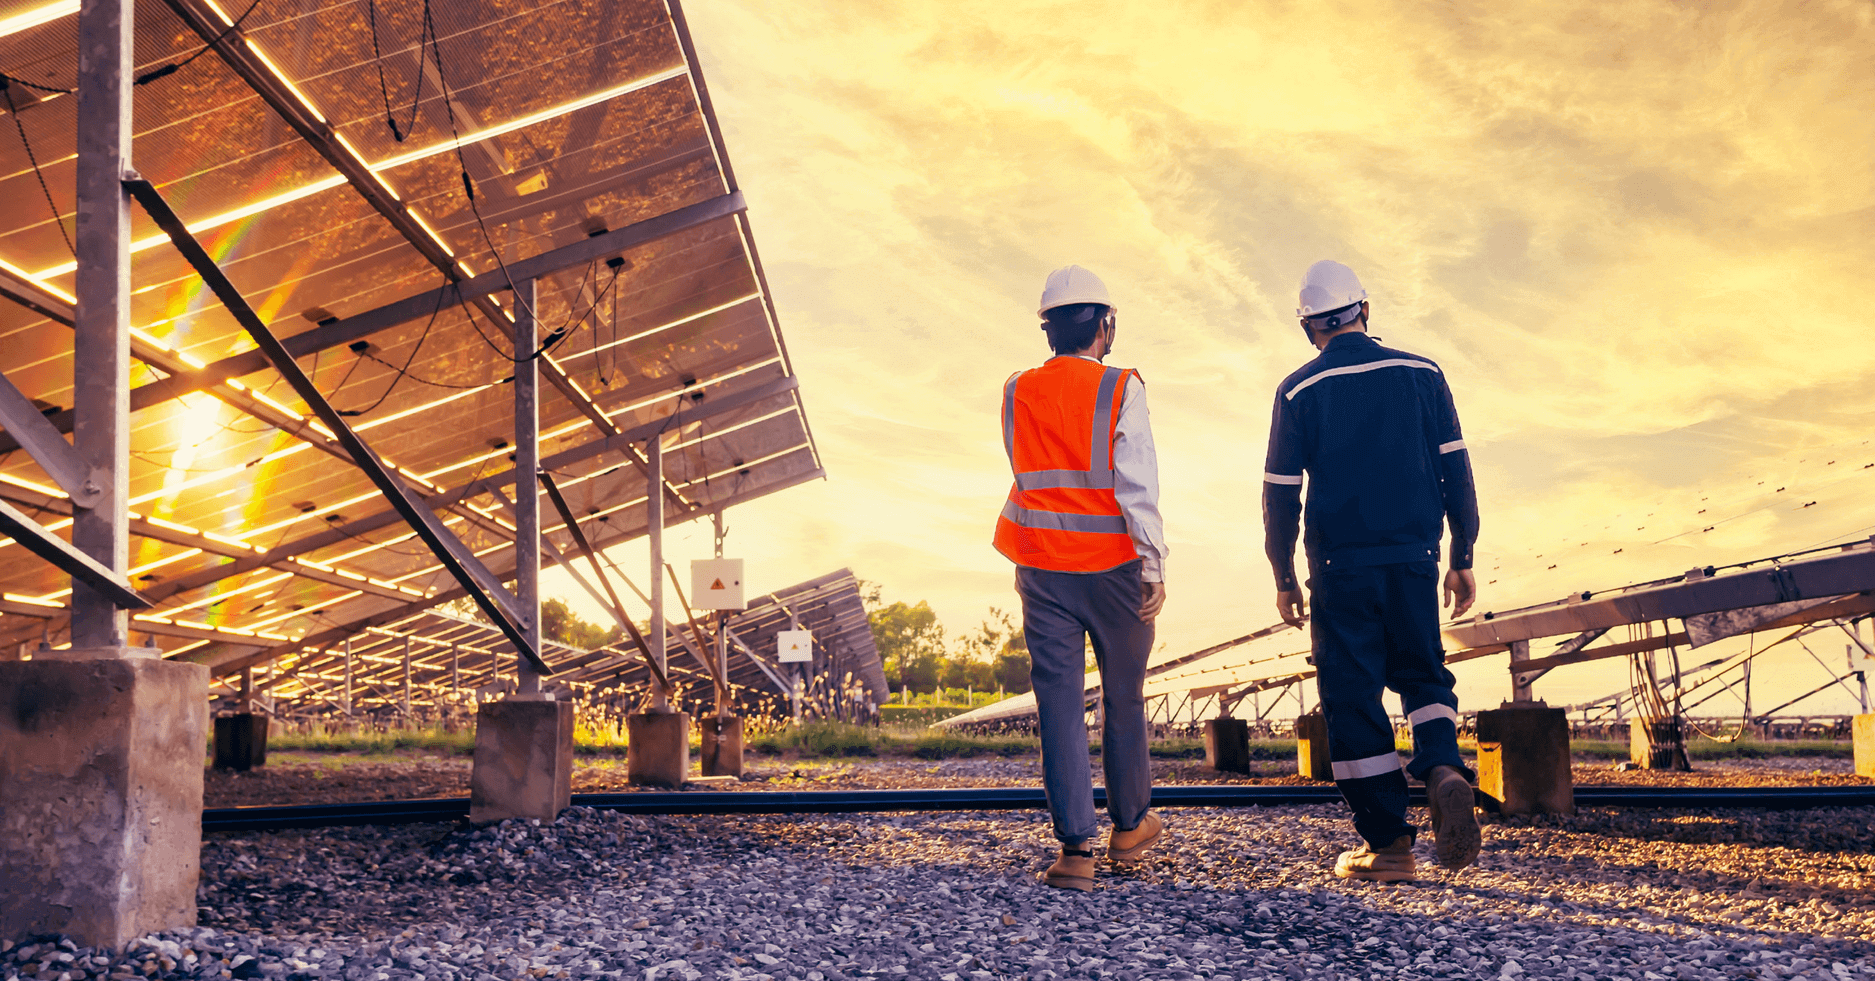 Two workers walk outside through a solar farm, in between two solar panels